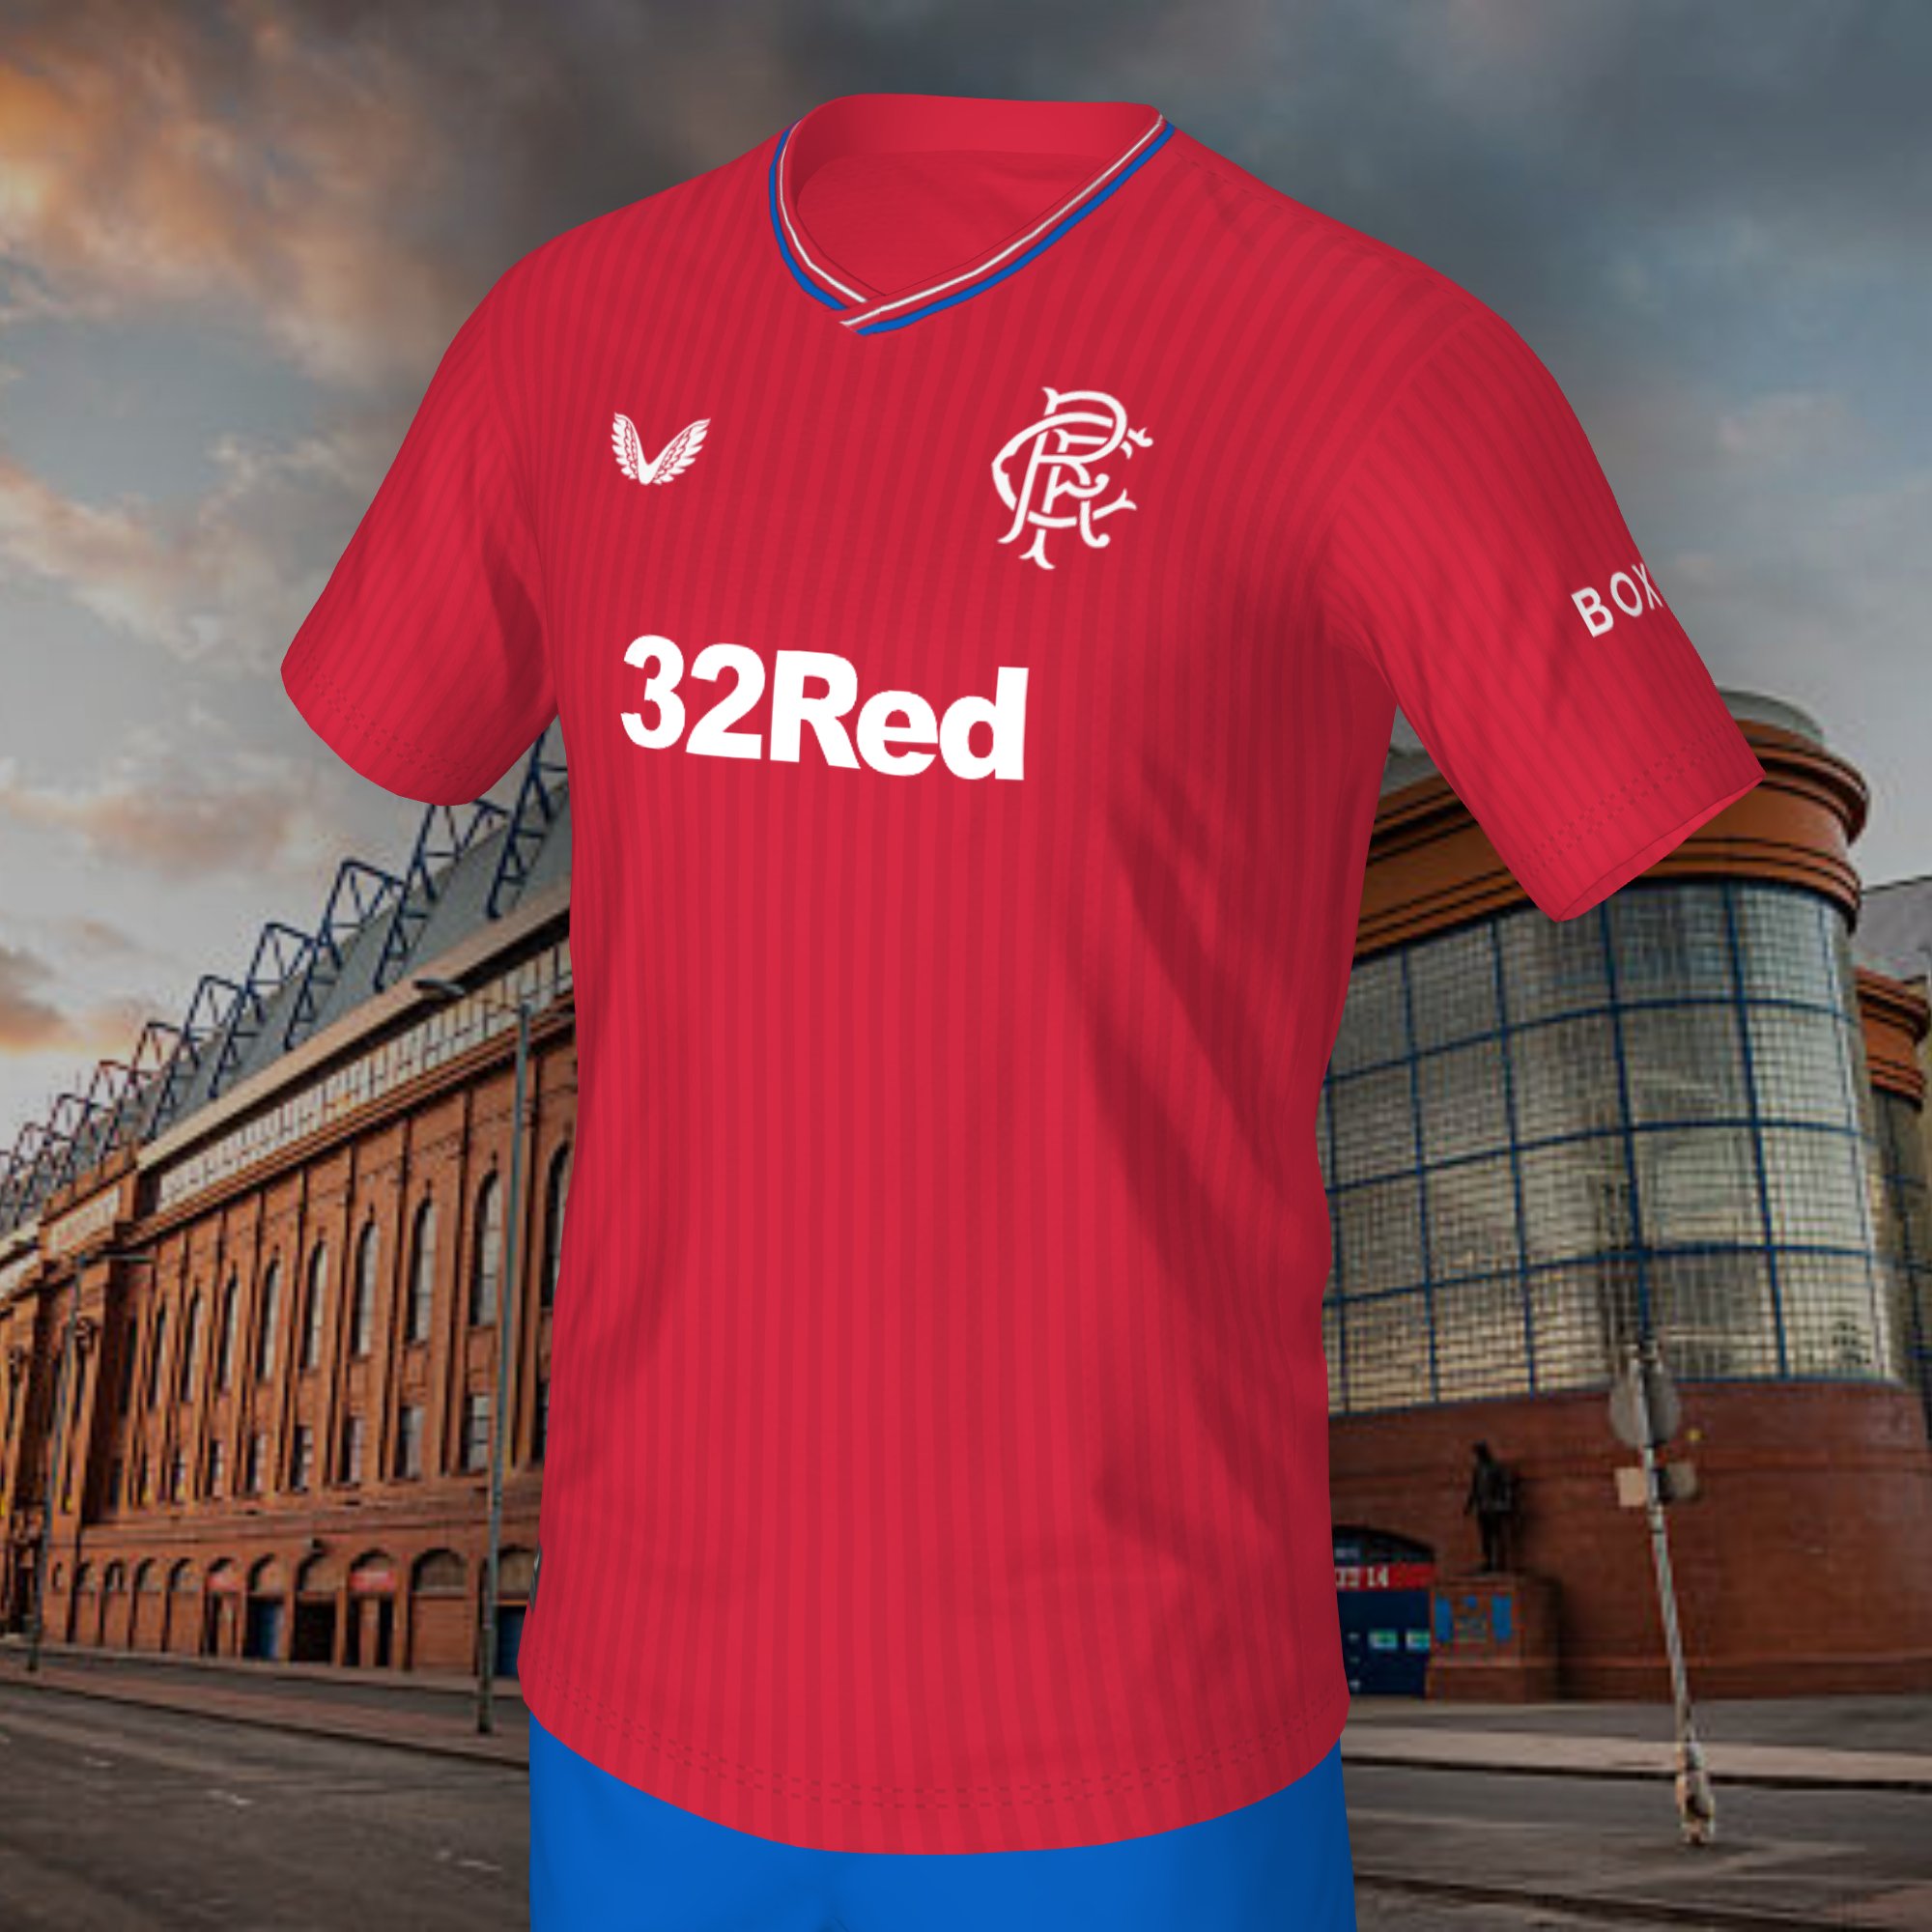 Concept Rangers Kits on X: Rangers 23/24 Home Kit design in red